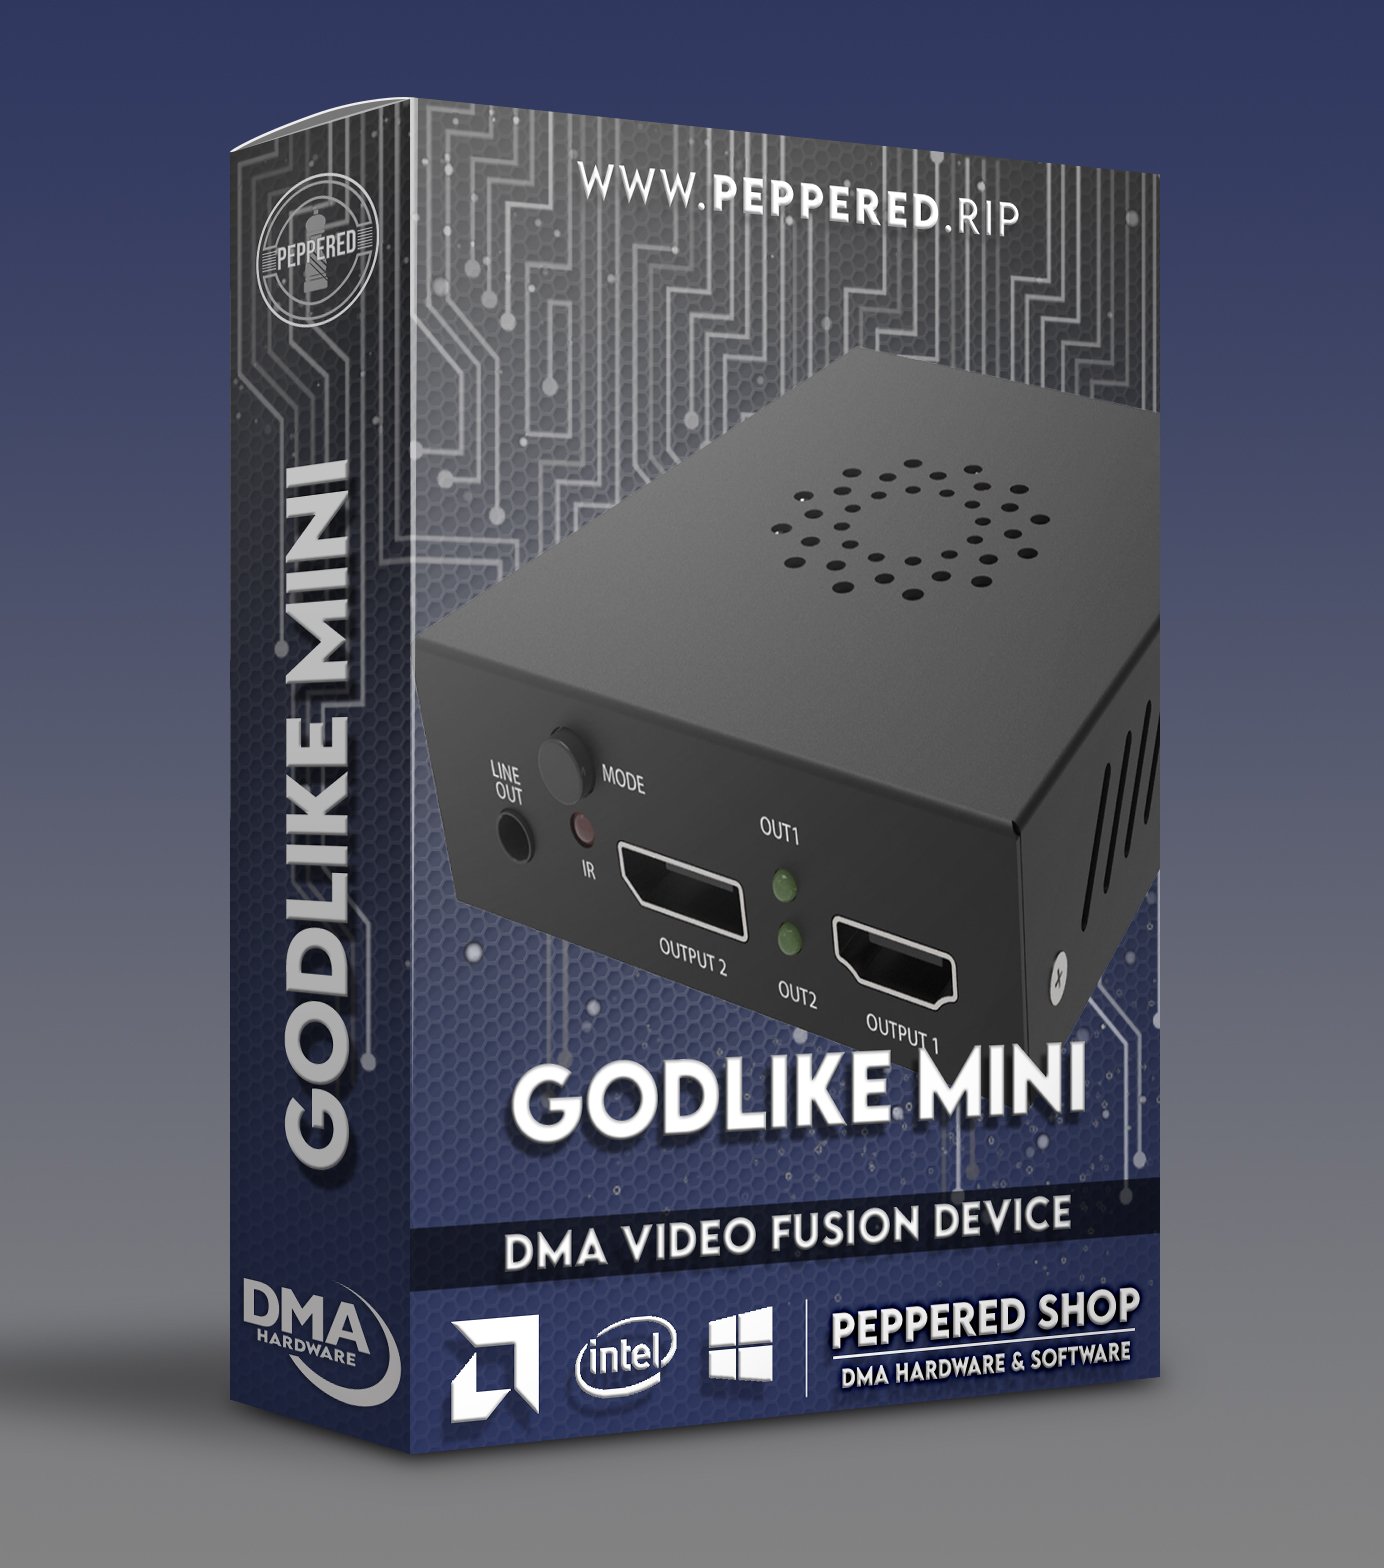 More information about "GODLIKE MINI"